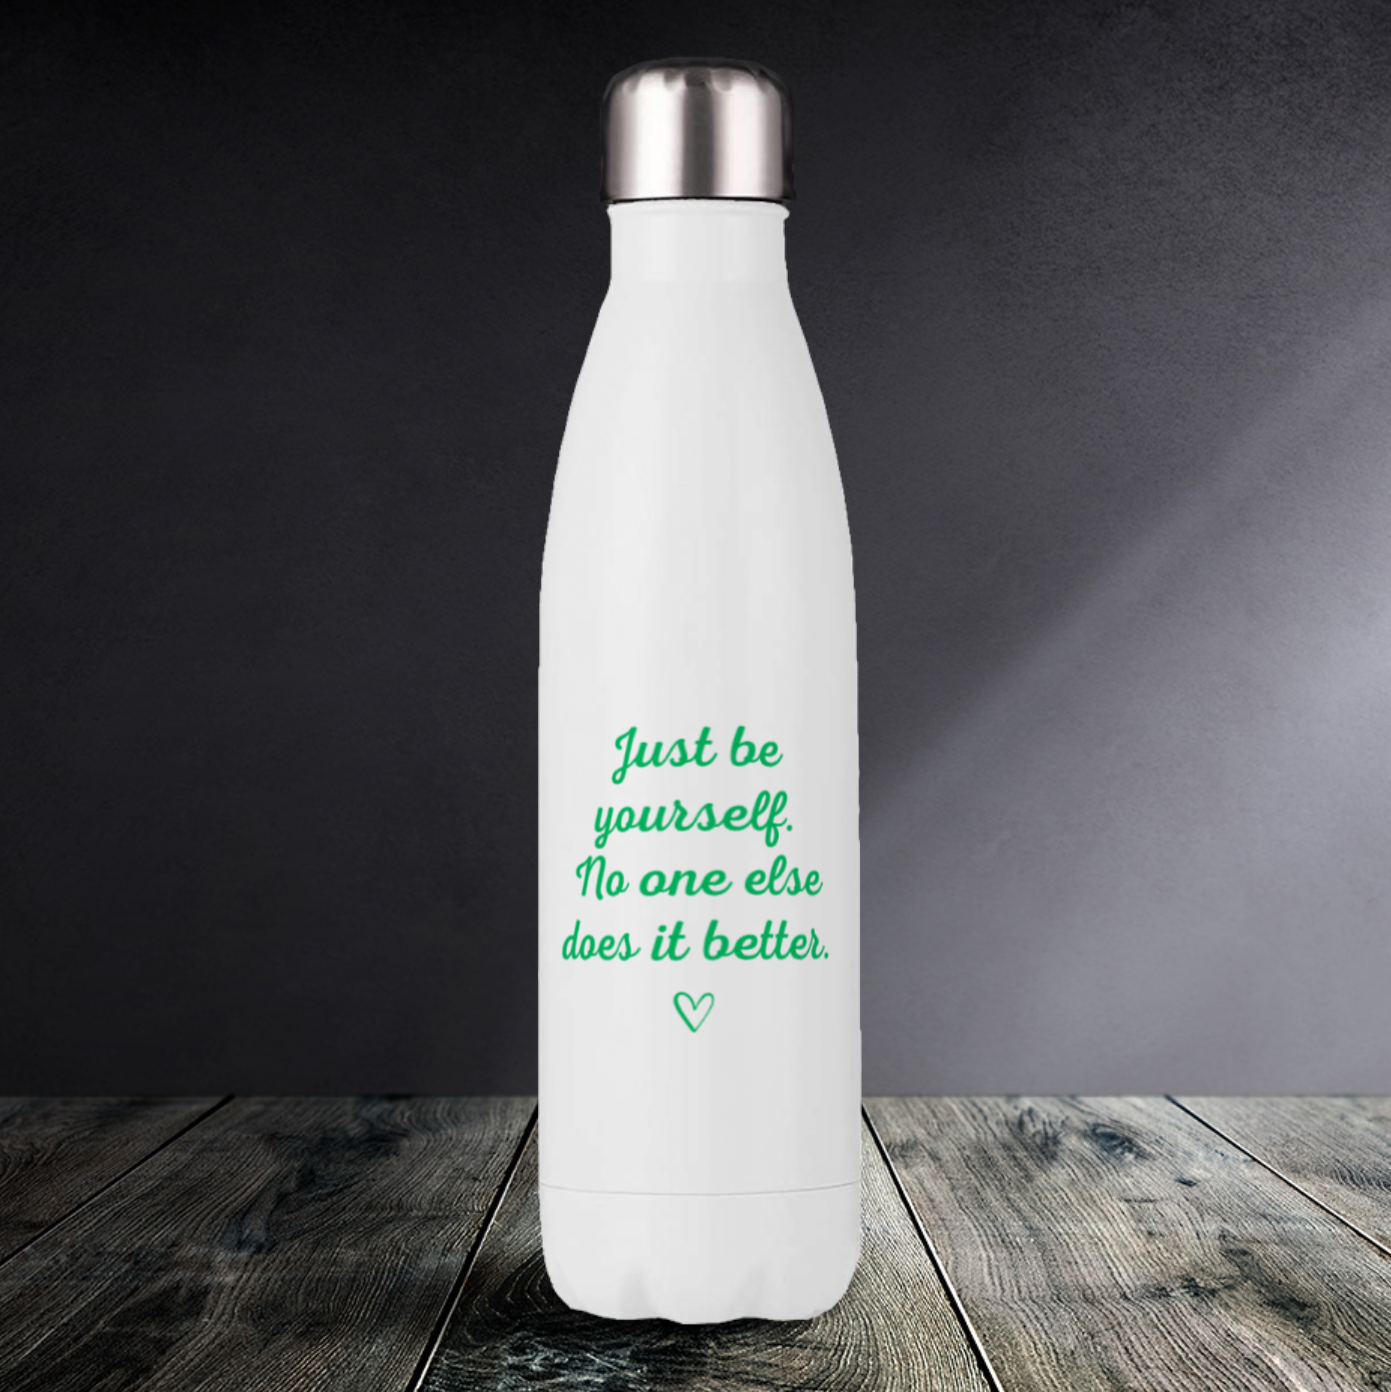 Just be yourself - Drink Bottles